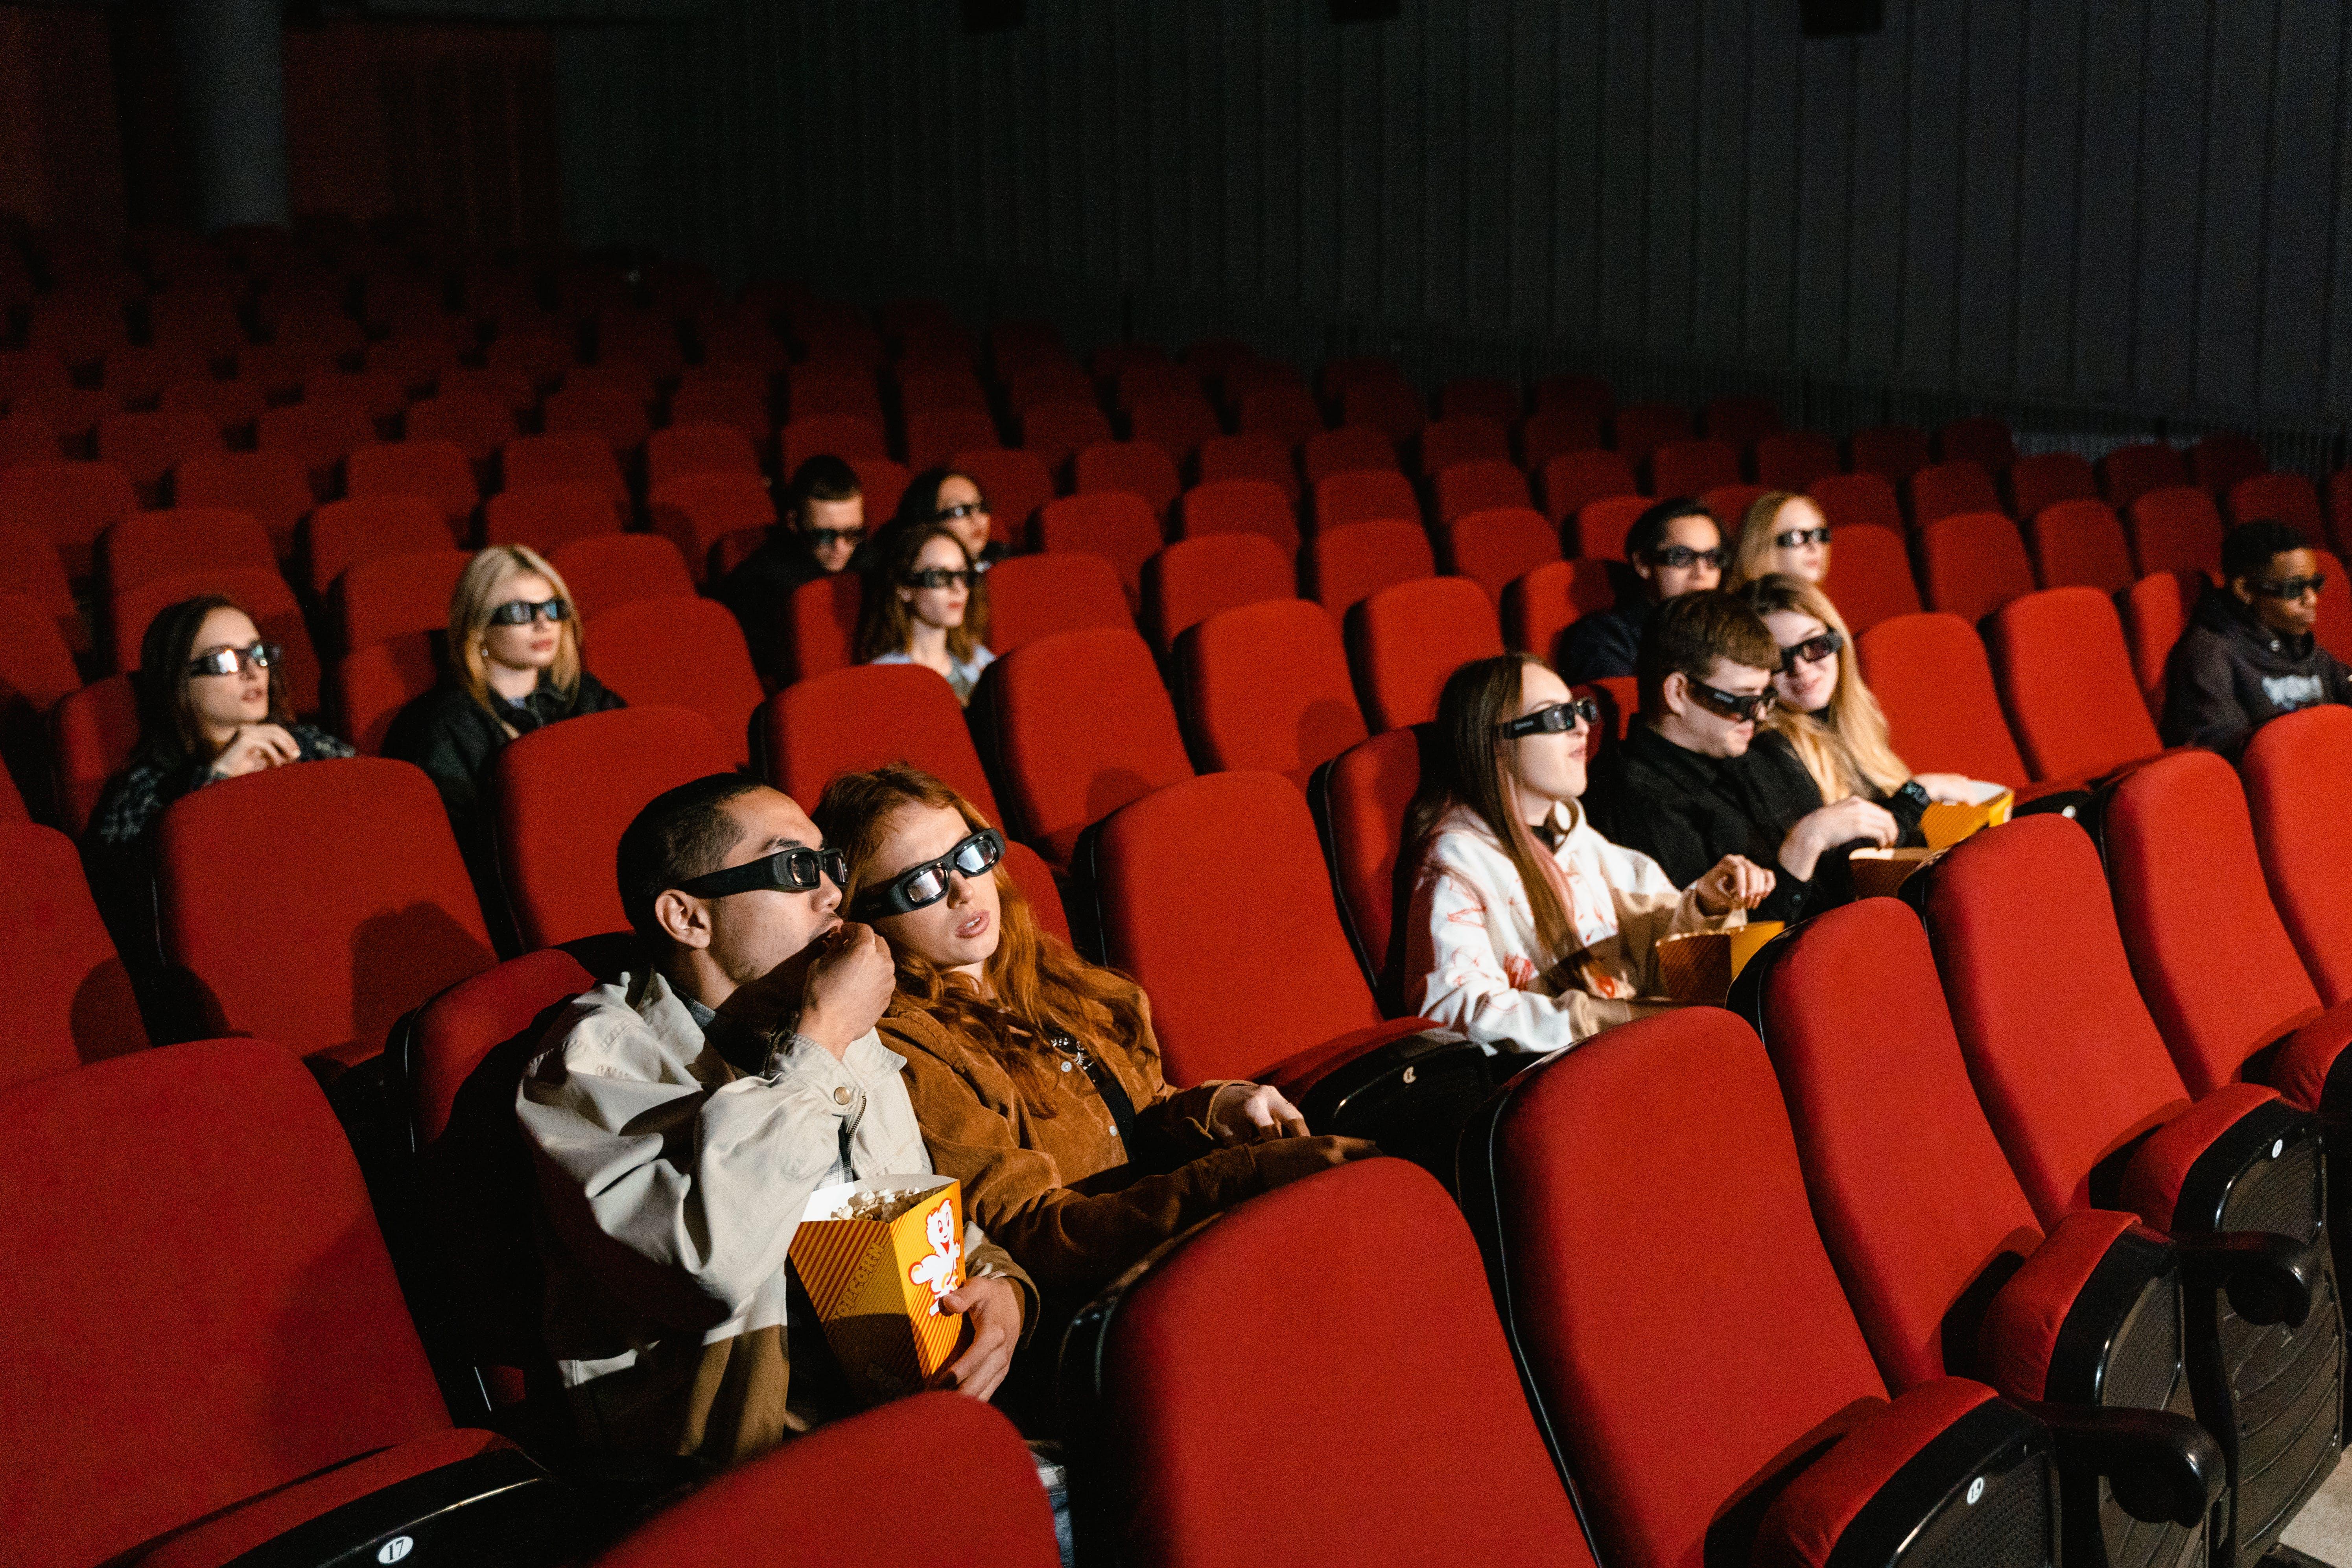 What does 4D mean in a movie theater? 